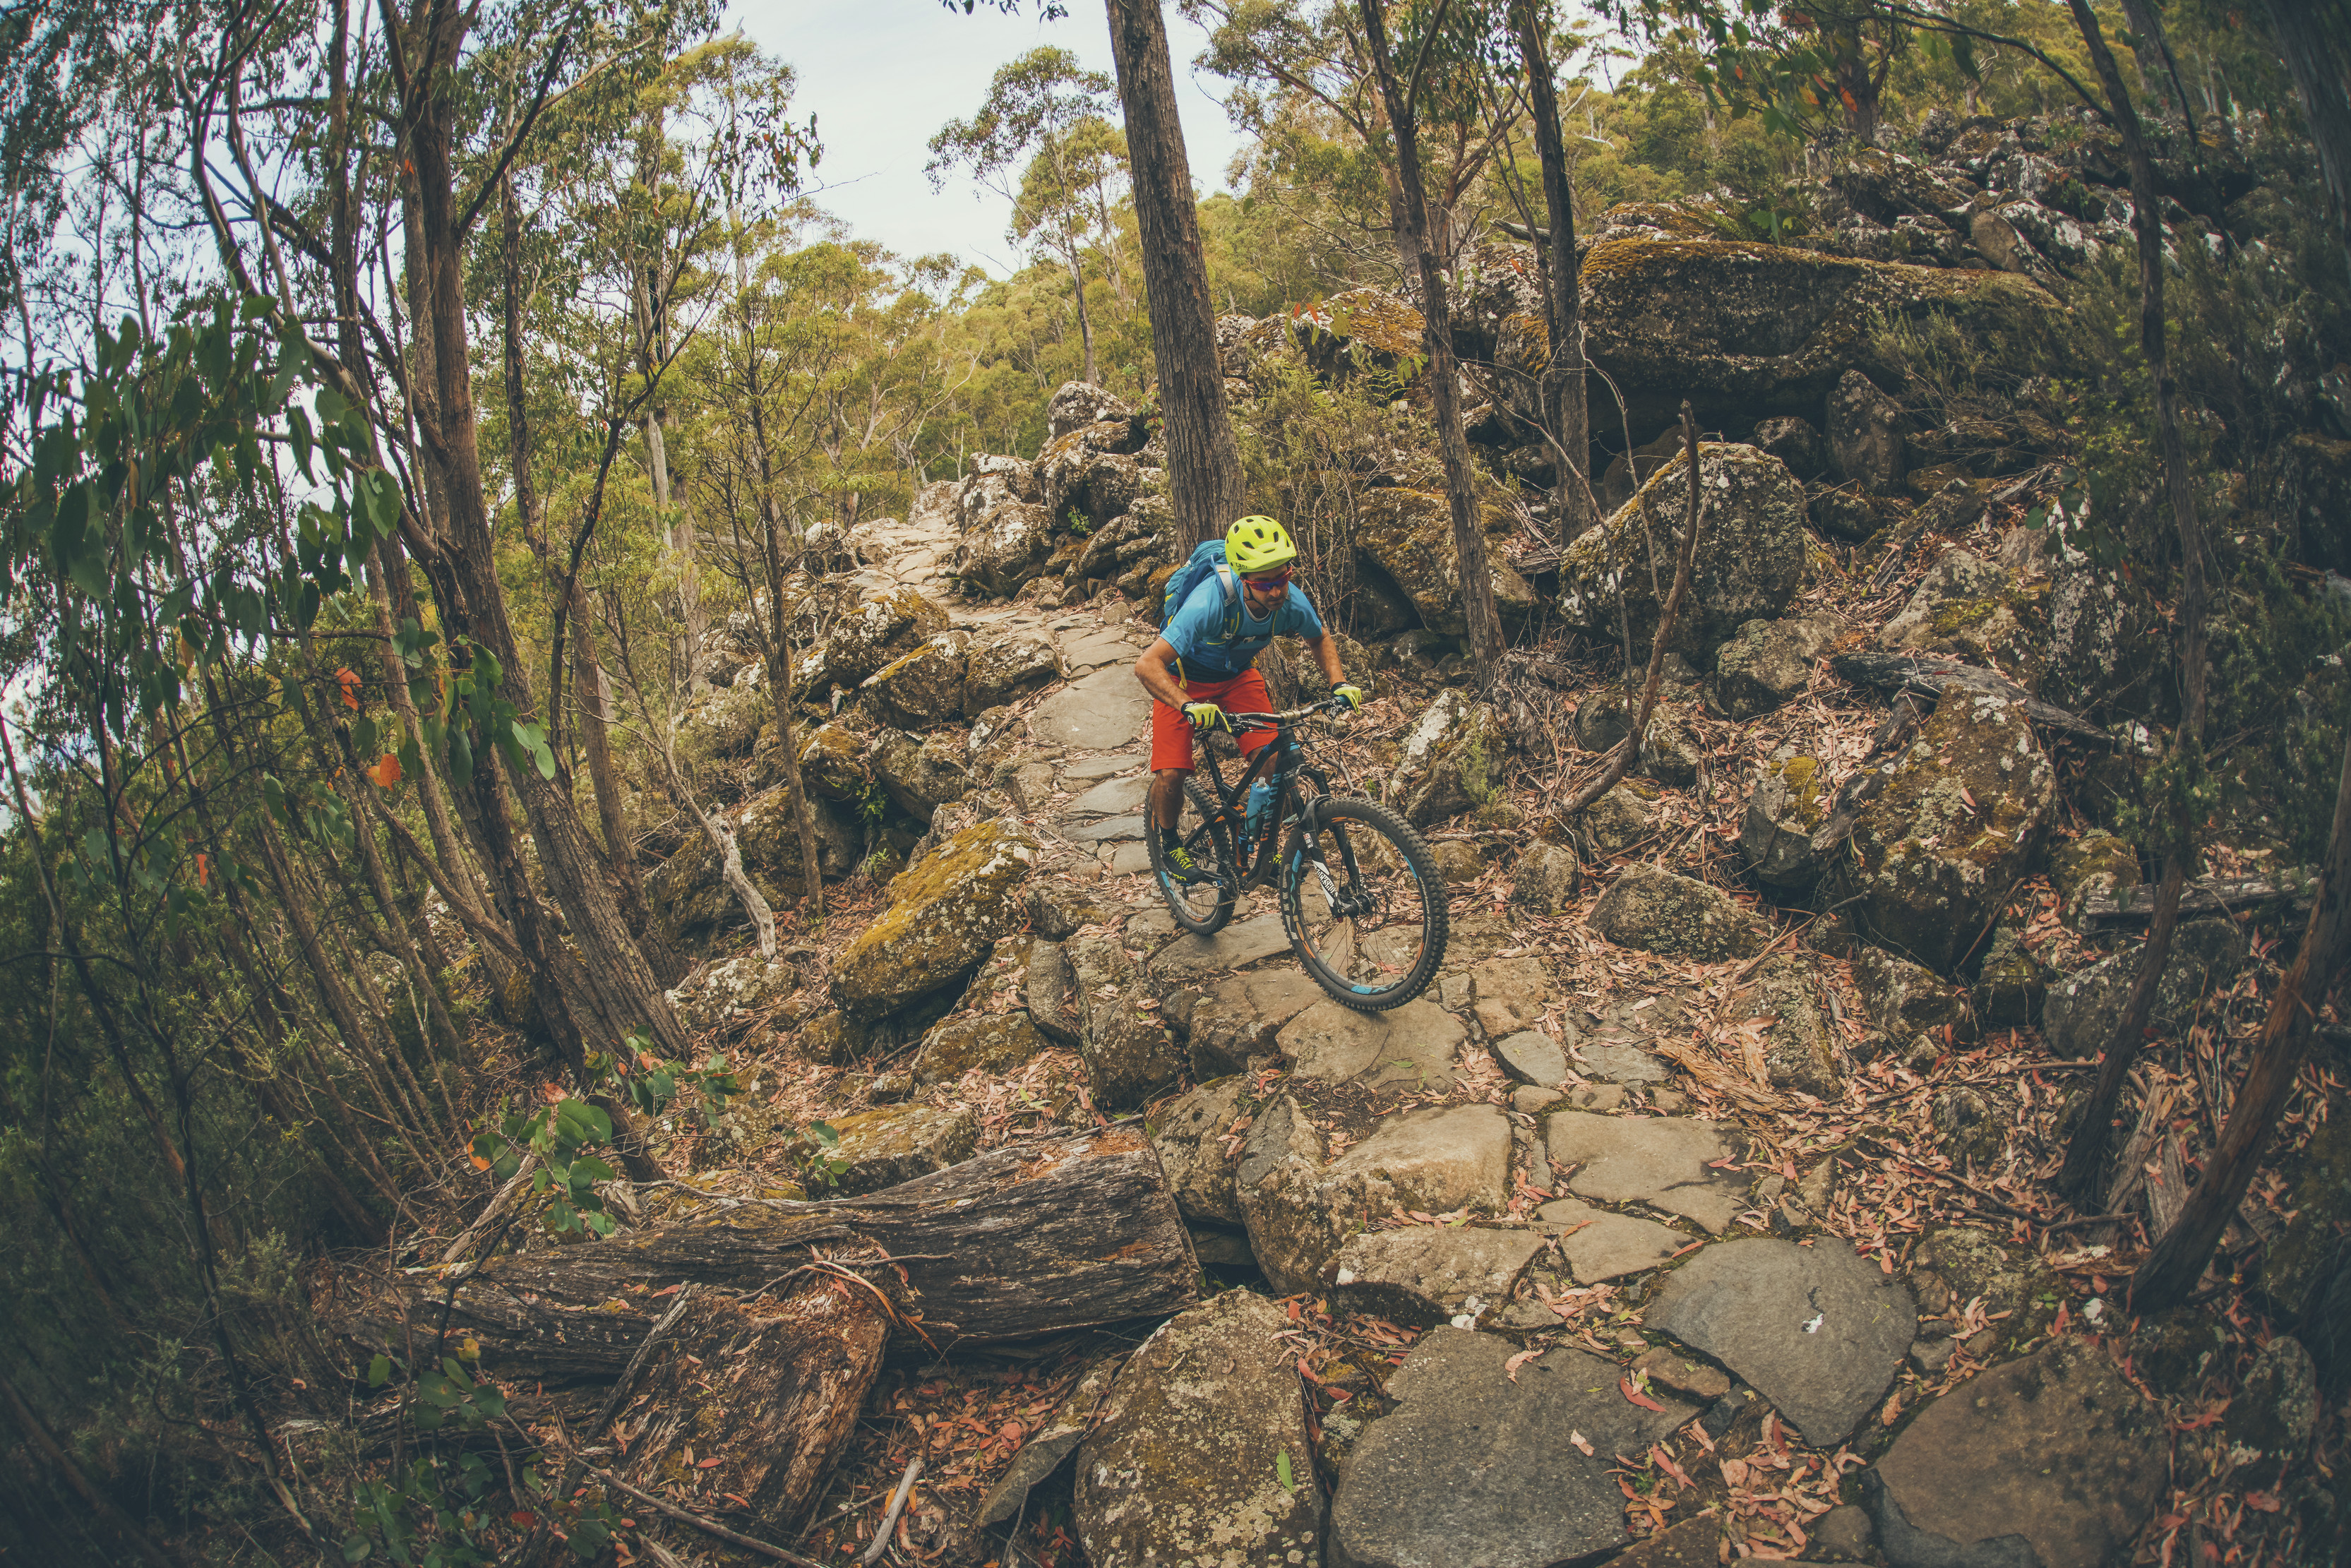 Mountain bike rider in vibrant gear riding down a rocky path on the North South Track, kunanyi / Mt Wellington.